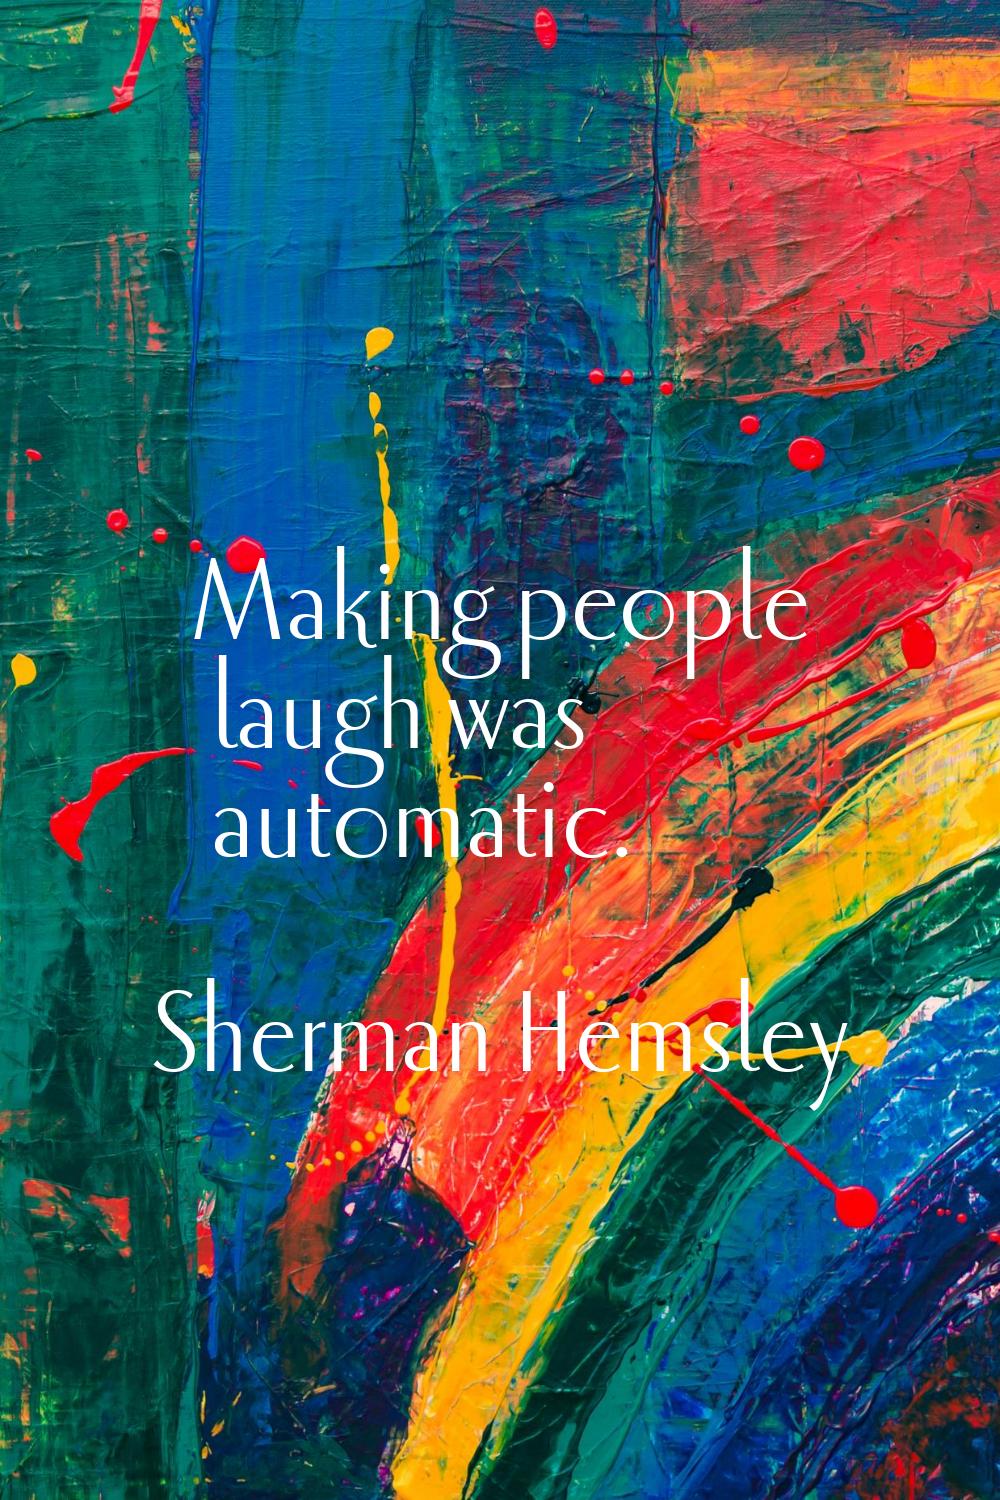 Making people laugh was automatic.